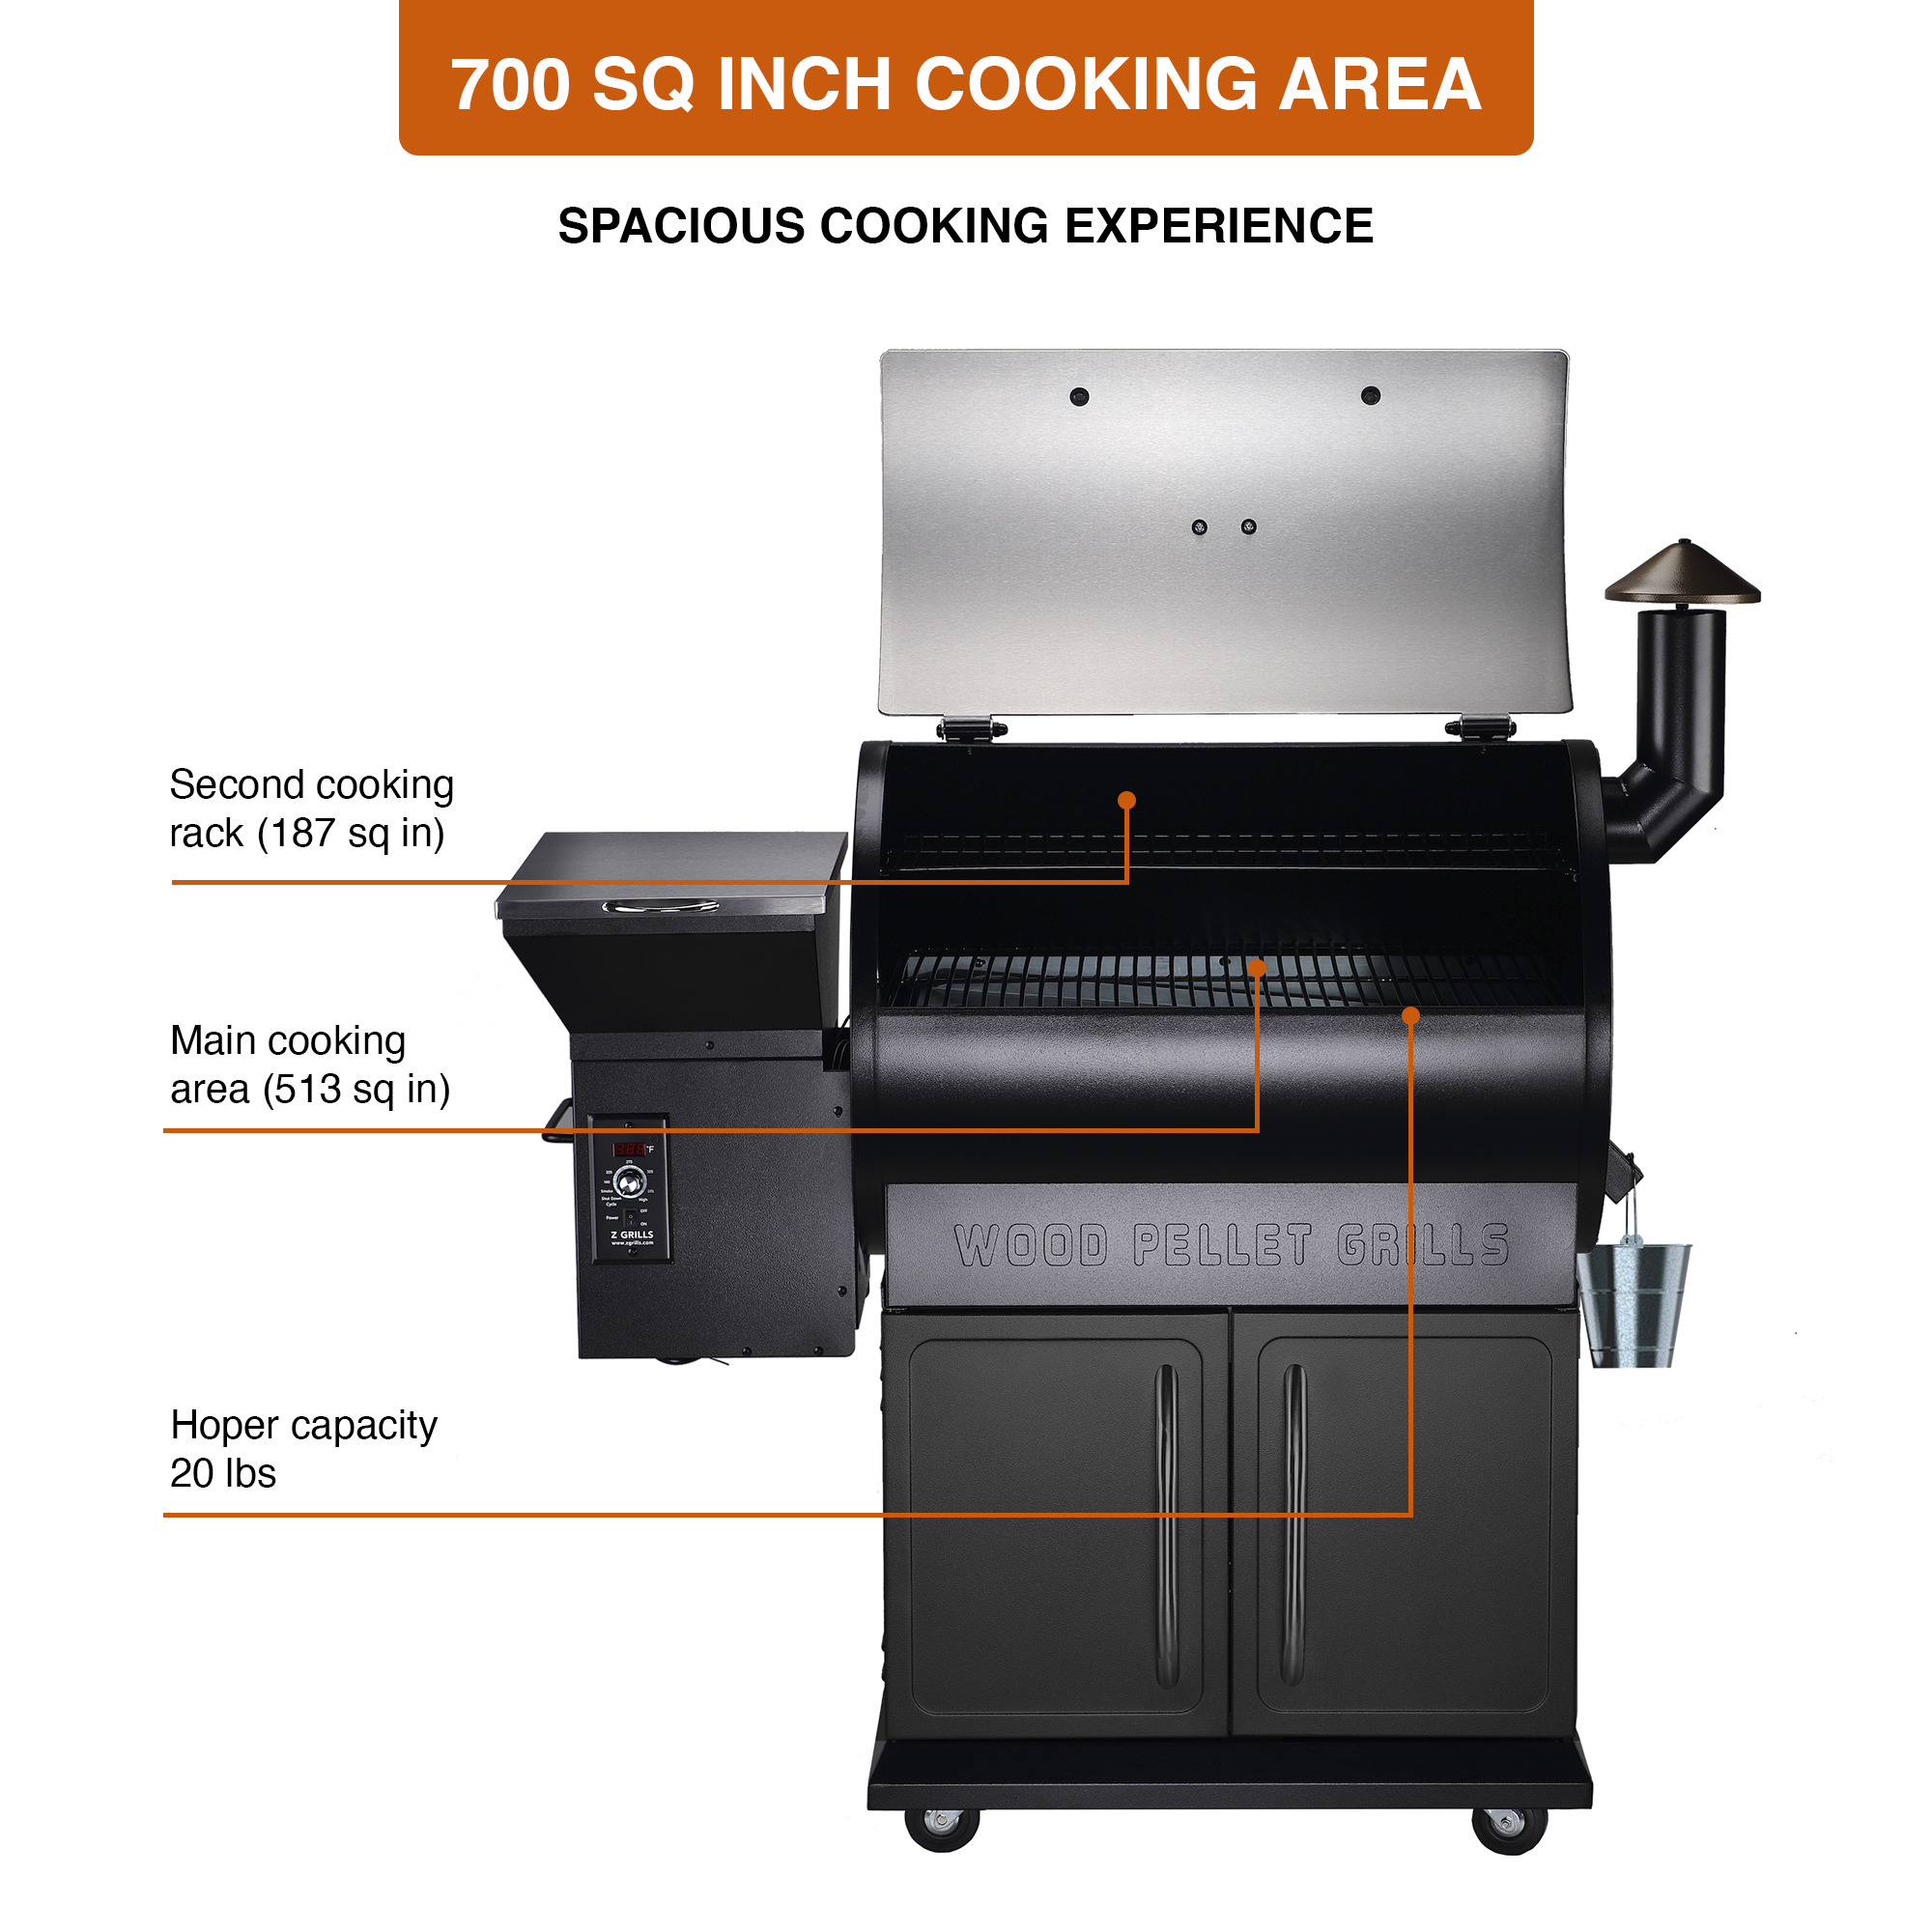 Z Grills ZPG-700E Wood Pellet Grill & Smoker 700 sq in 8 in 1 BBQ Auto Temperature 2020 Model Cover included in Stainless - image 5 of 10